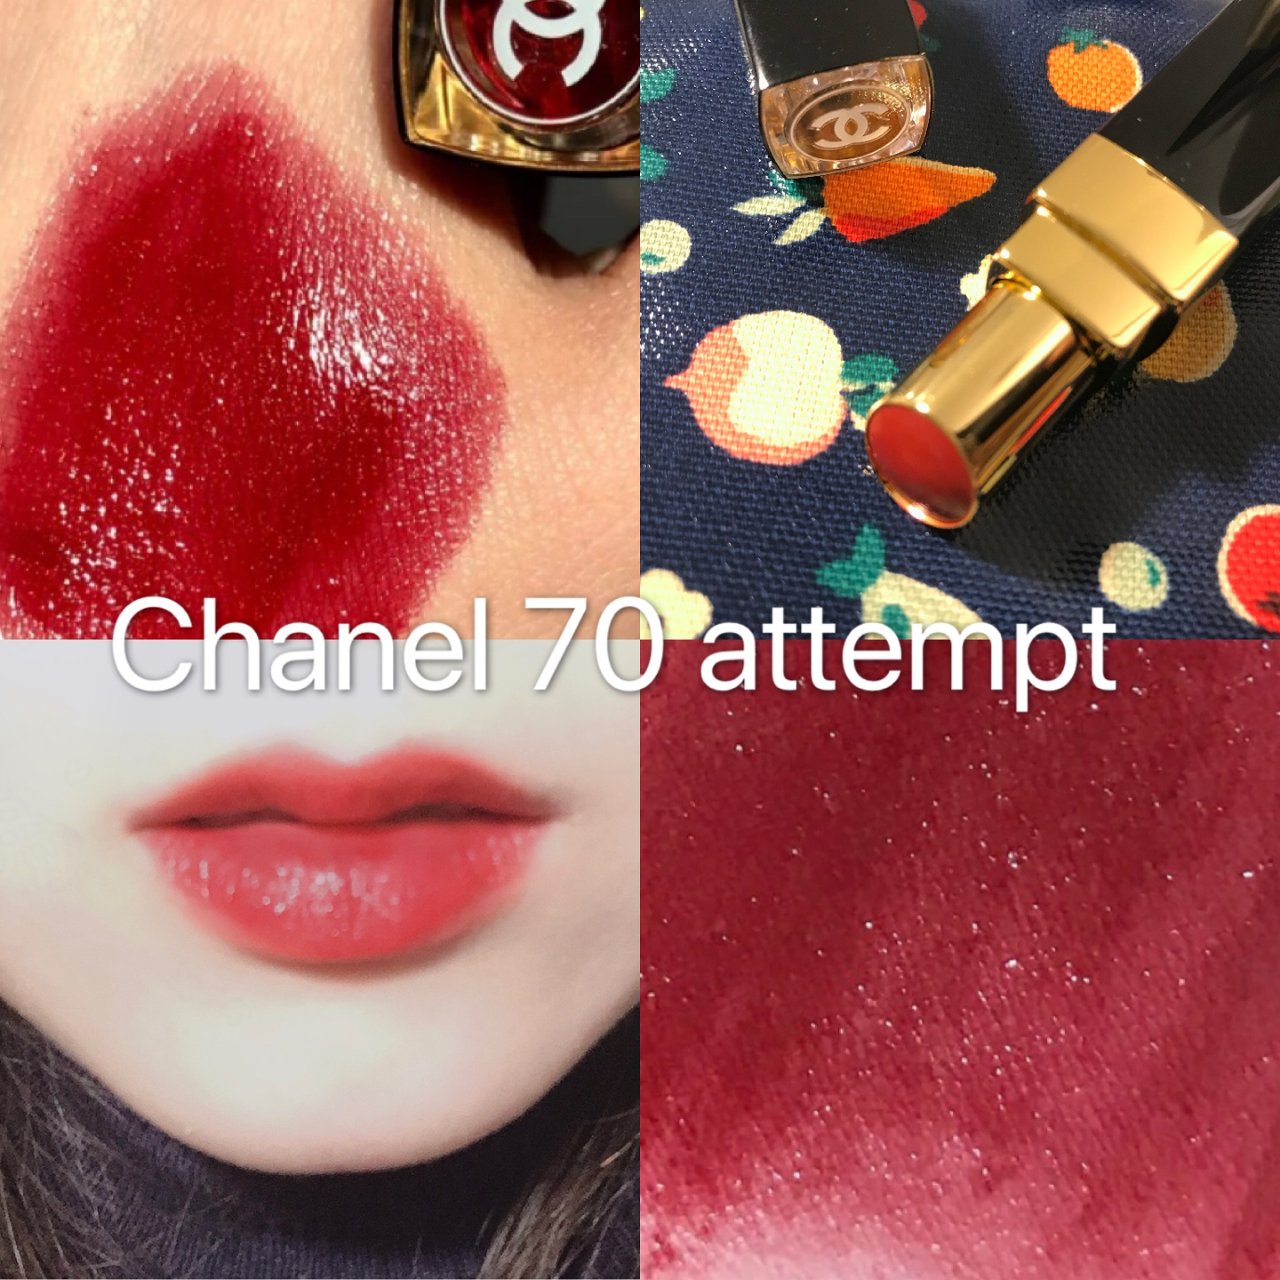 Chanel 70 Attempt